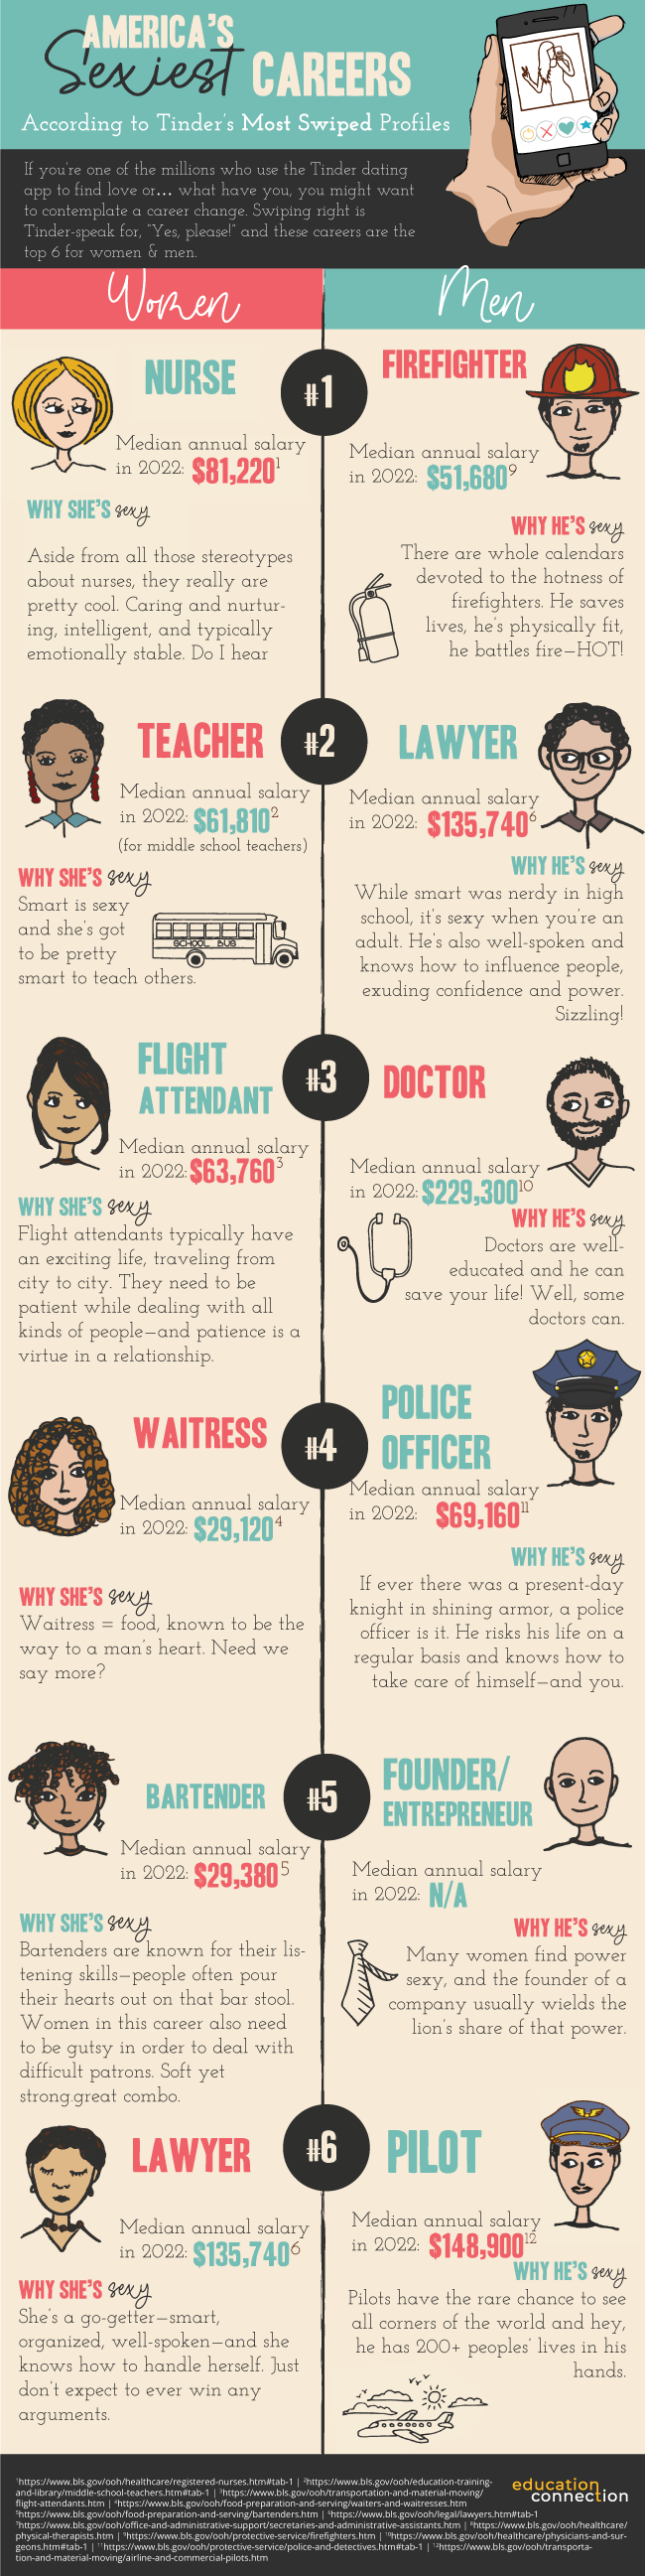 Tinder's Sexiest Careers Infographic